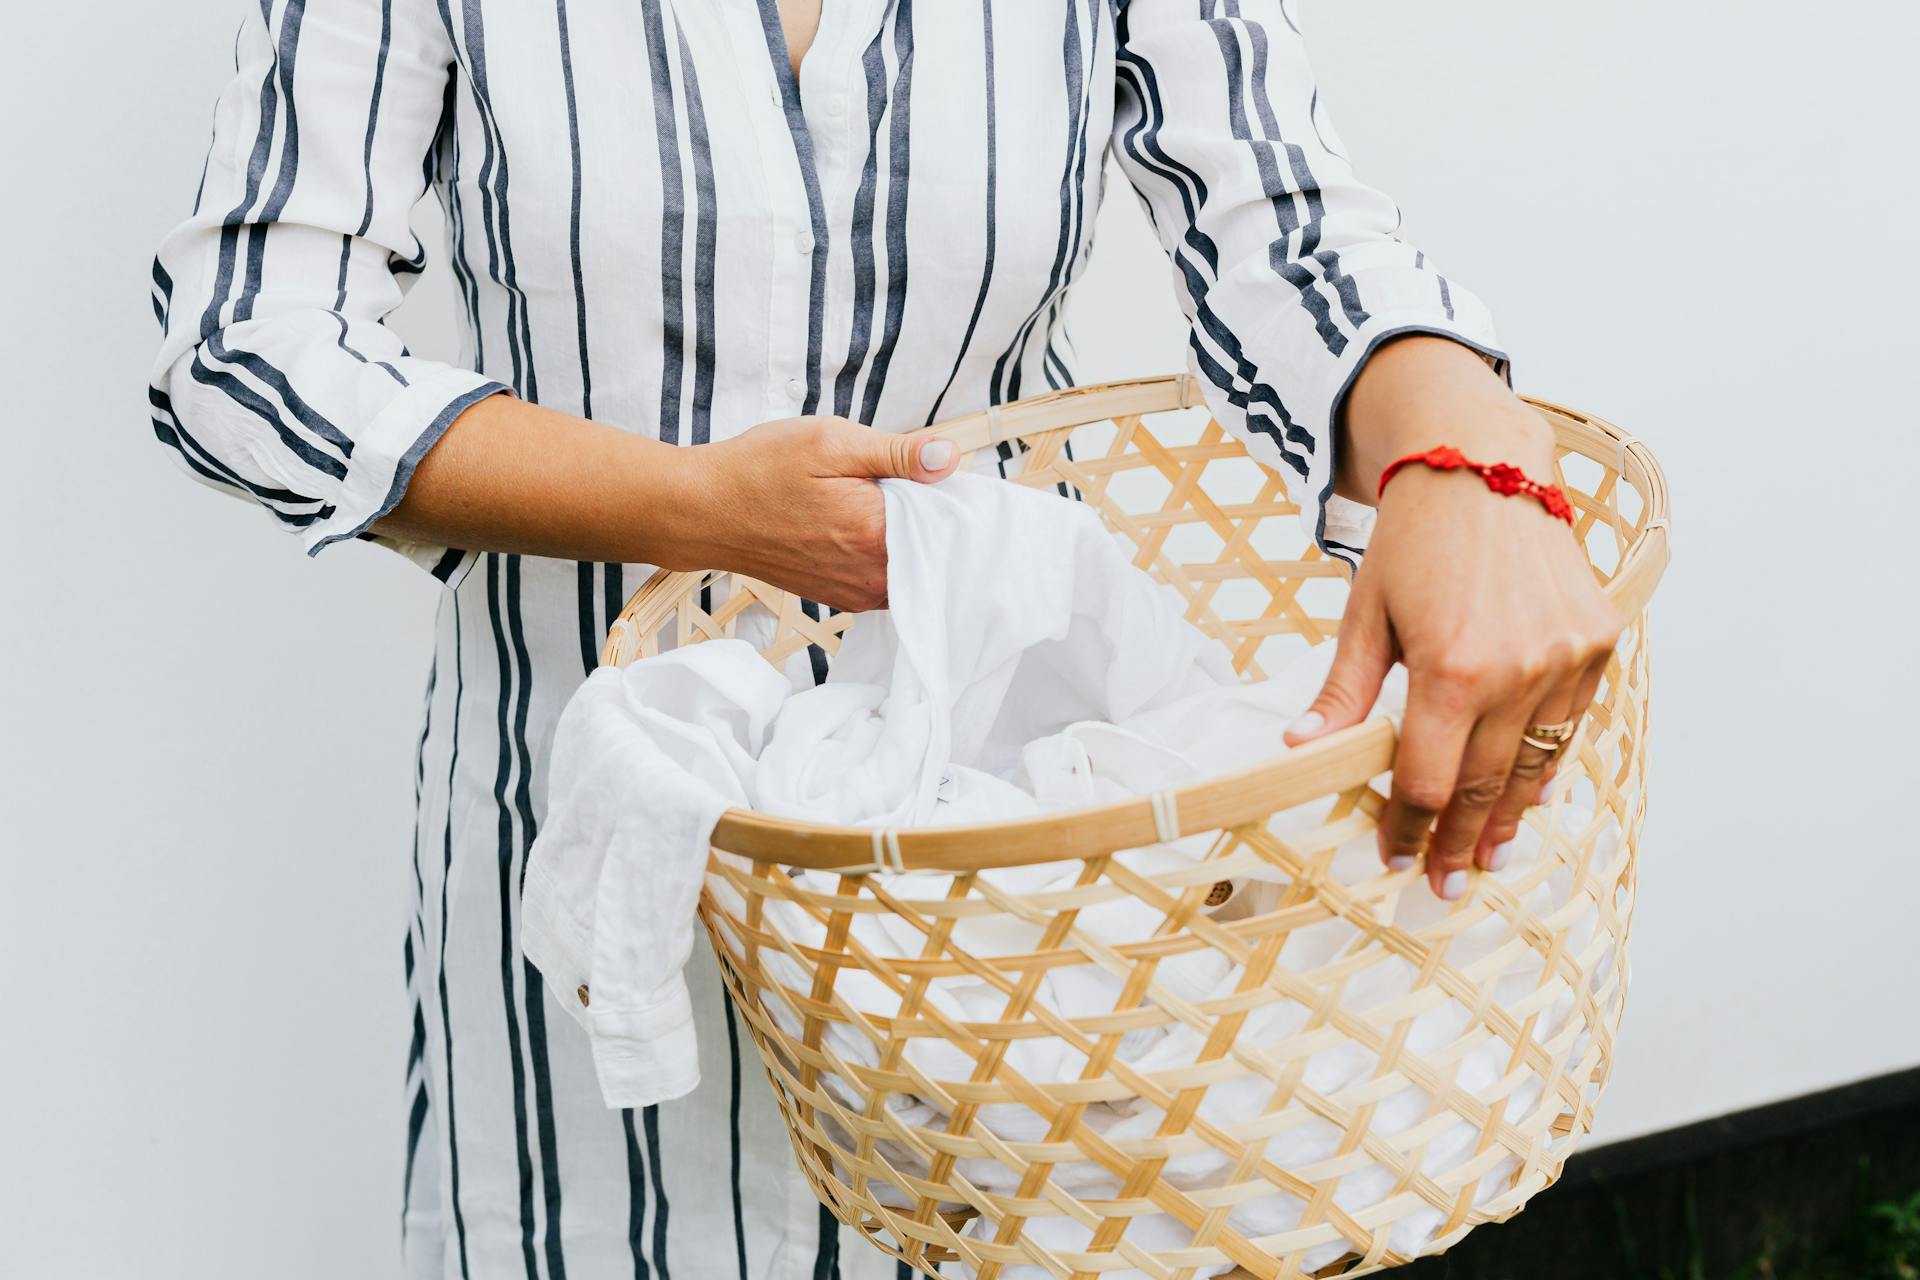 A person holding a laundry basket | Source: Pexels